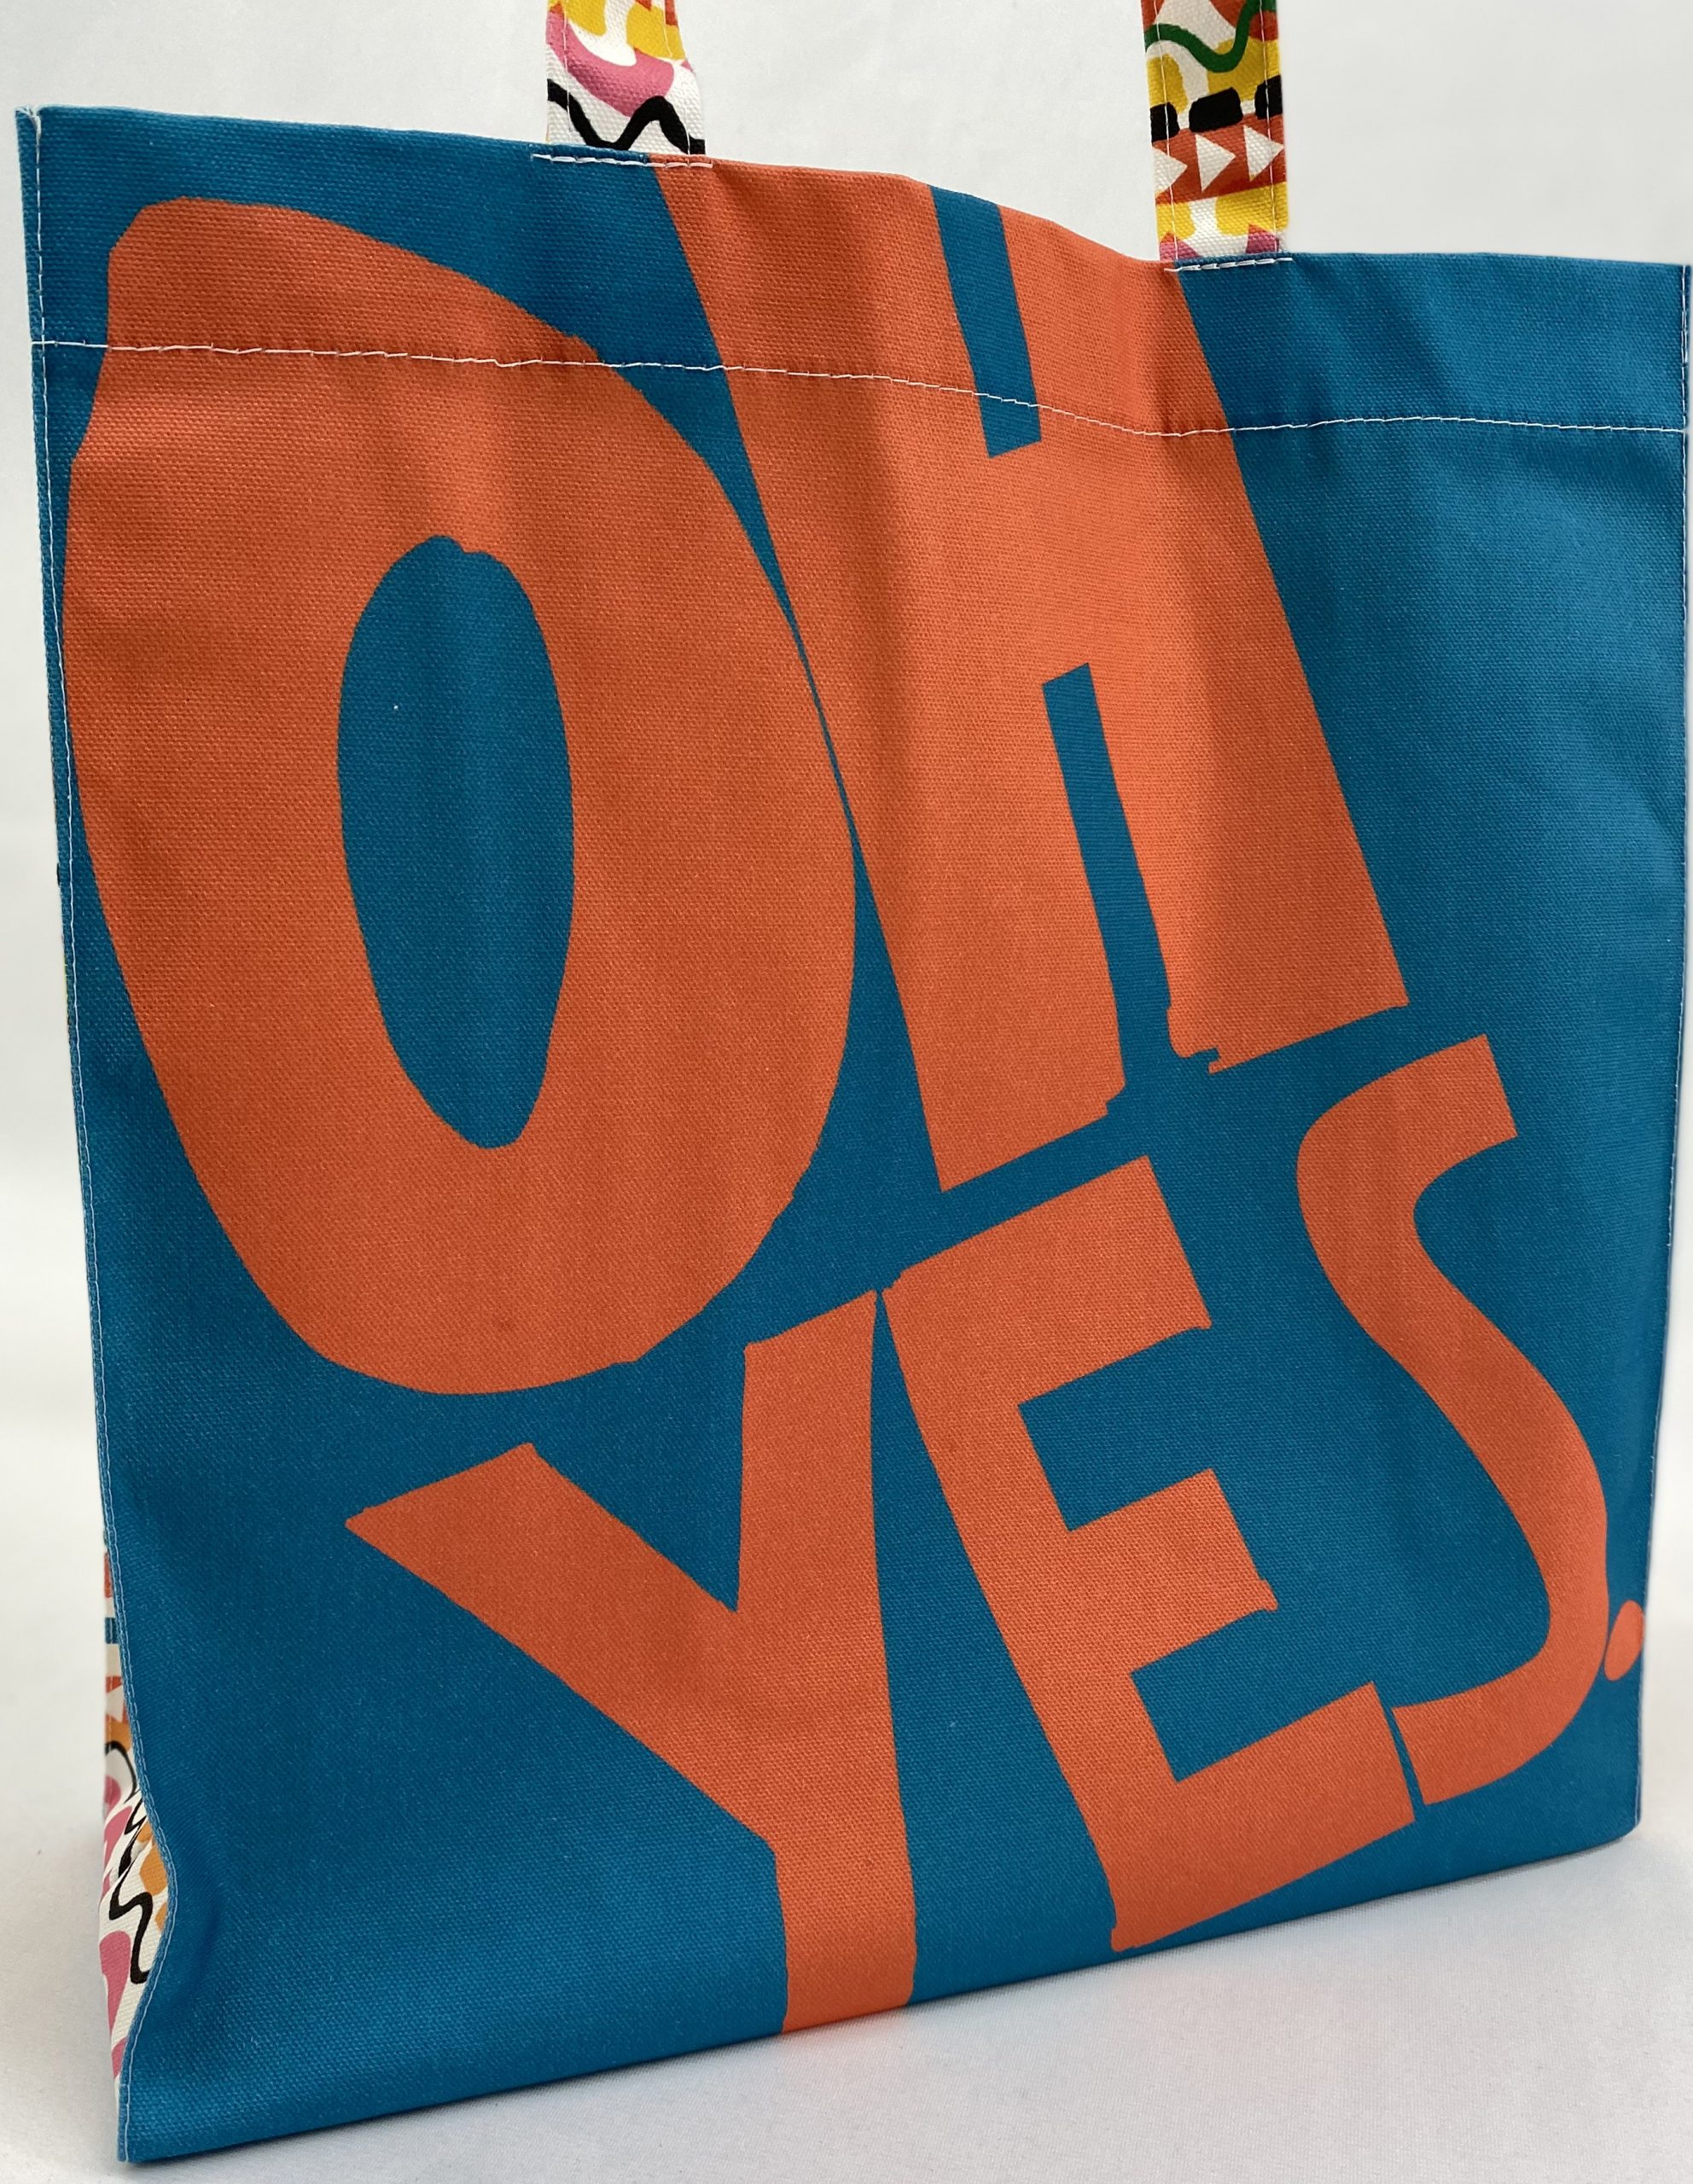 Organic Tote bag Designed by RUDE for Paul Bristow’s colection of sustainable textiles